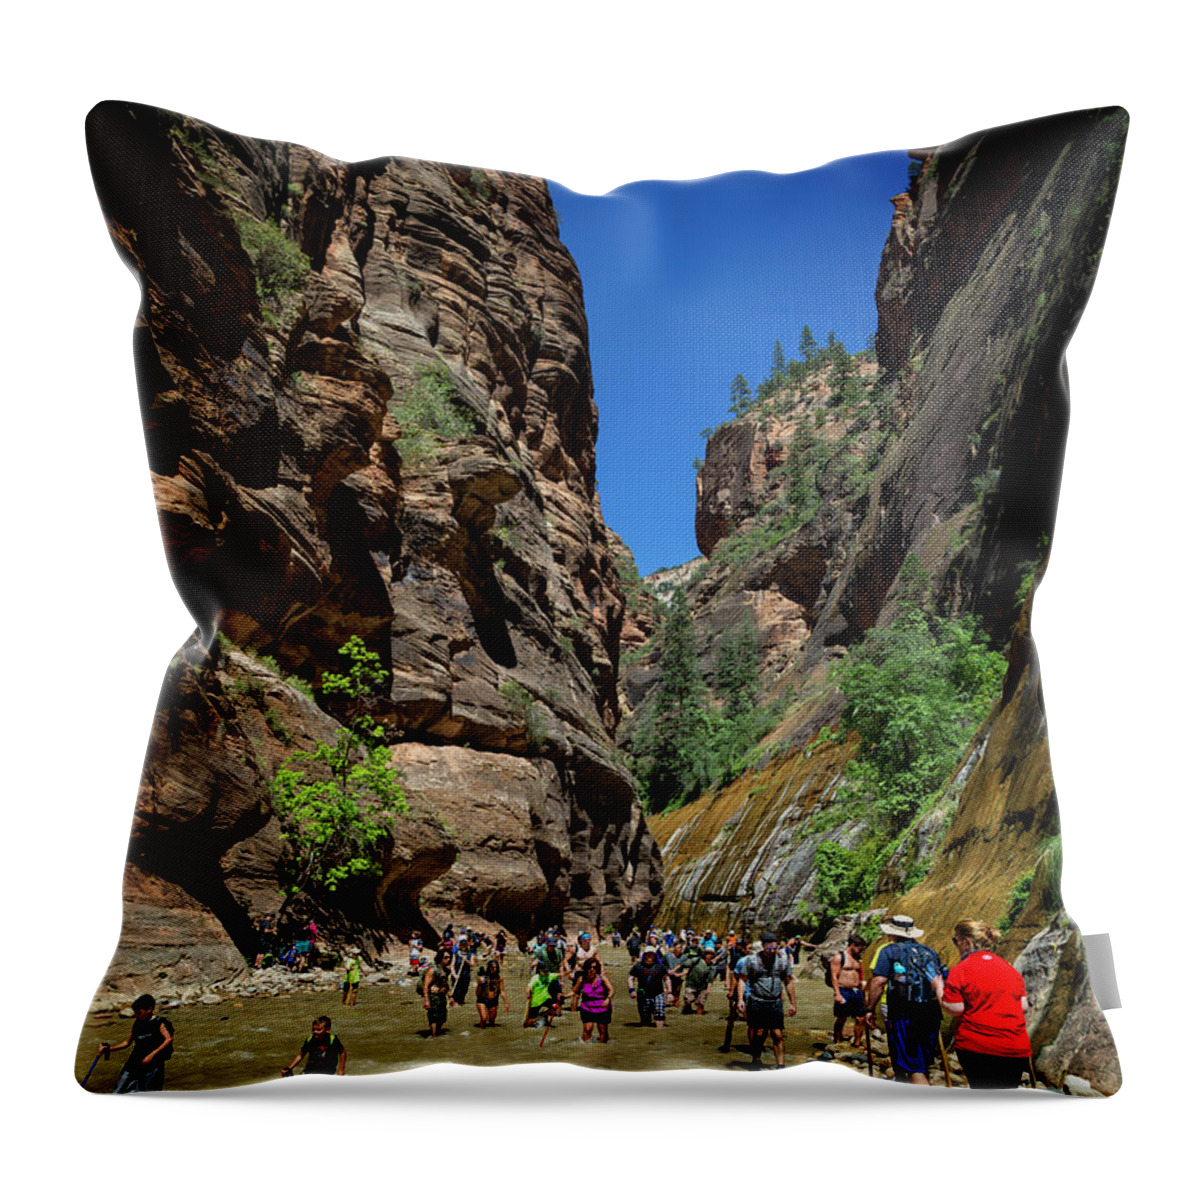 Zion Throw Pillow featuring the photograph Zion National Park II by Ricky Barnard